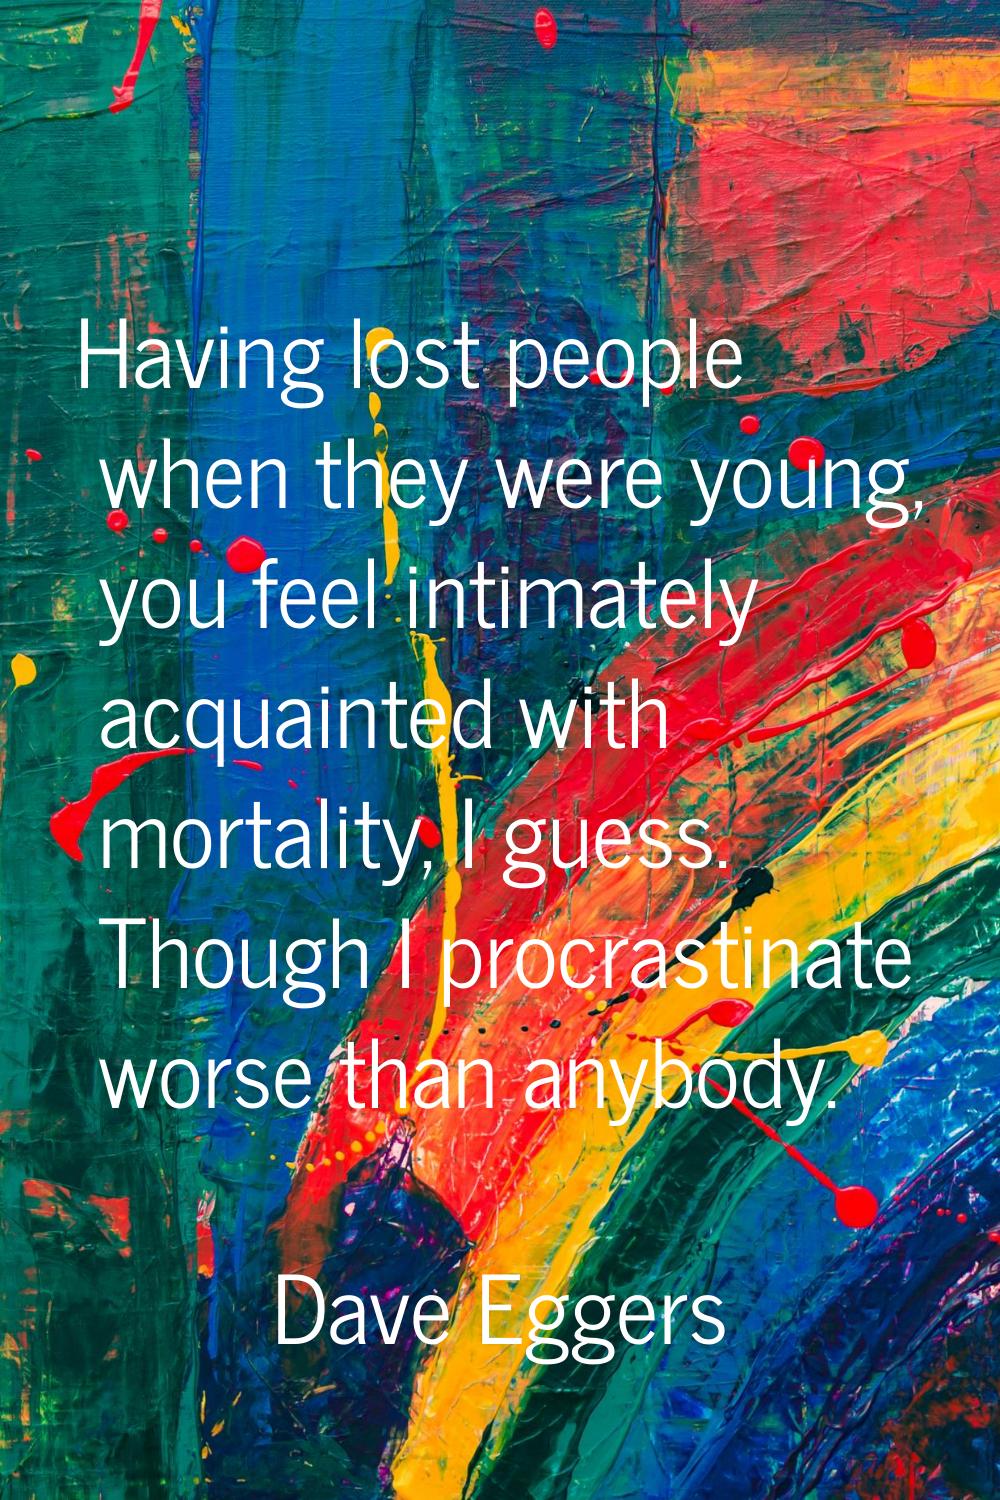 Having lost people when they were young, you feel intimately acquainted with mortality, I guess. Th